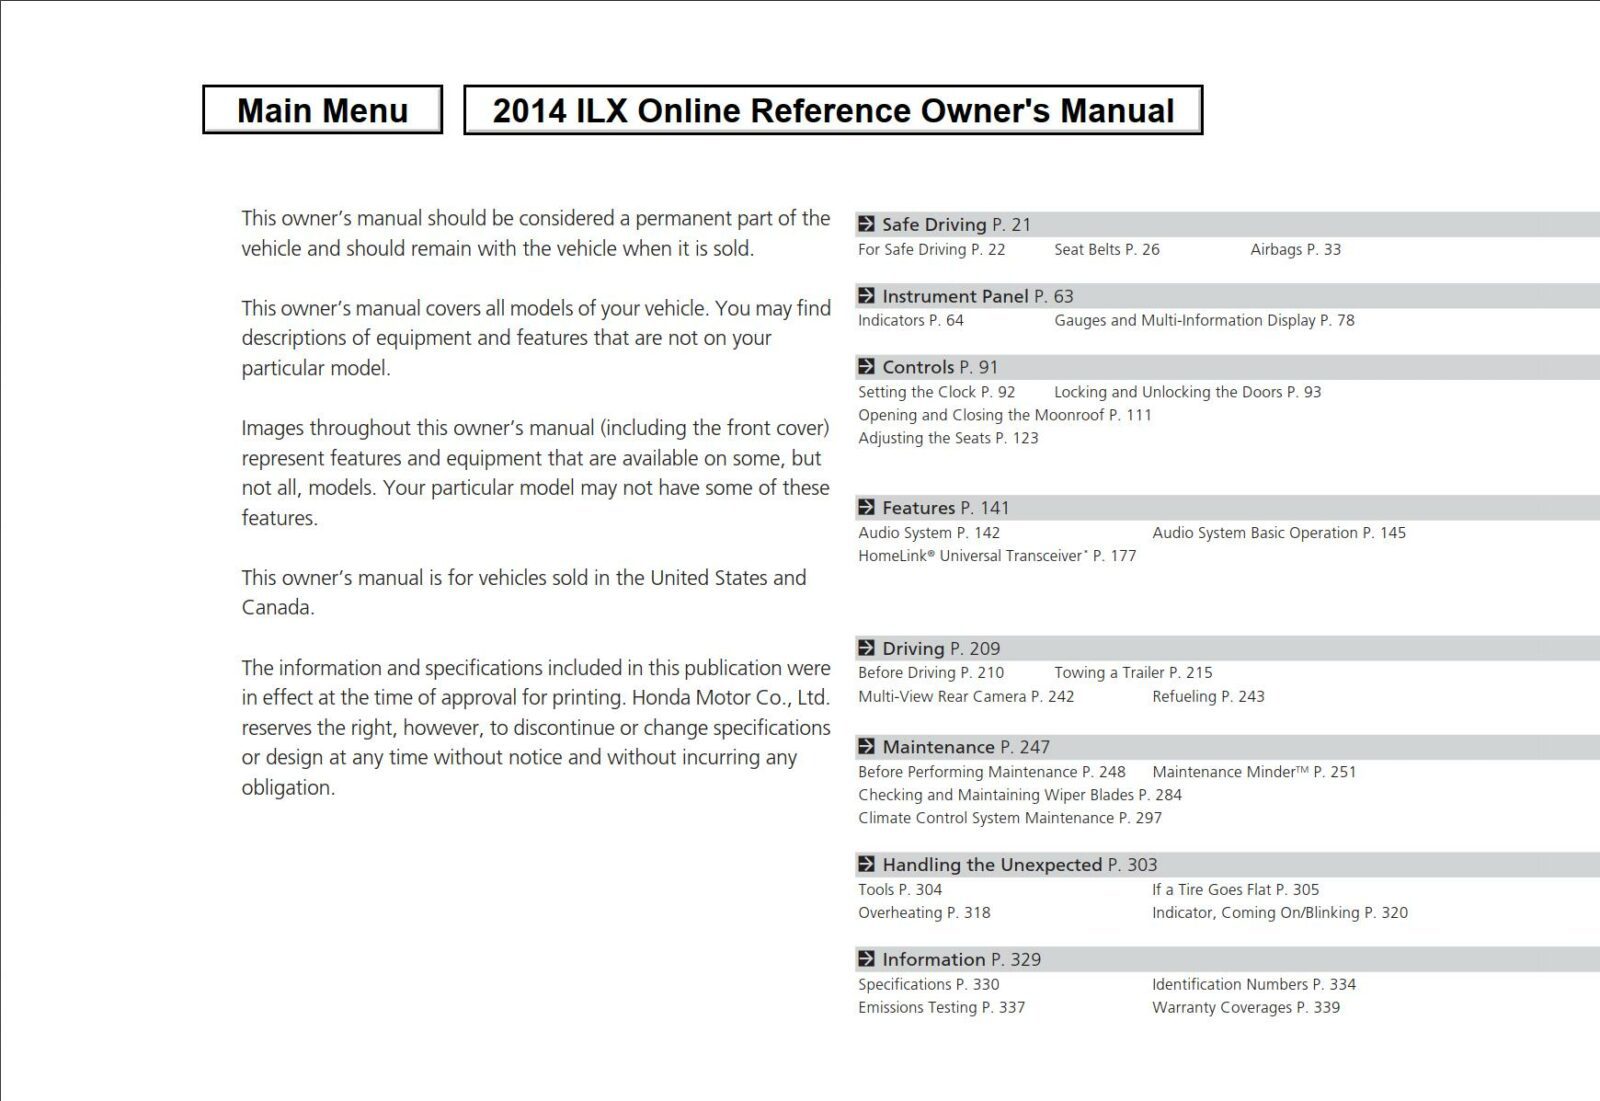 Acura ILX 2014 Owner's Manual – PDF Download